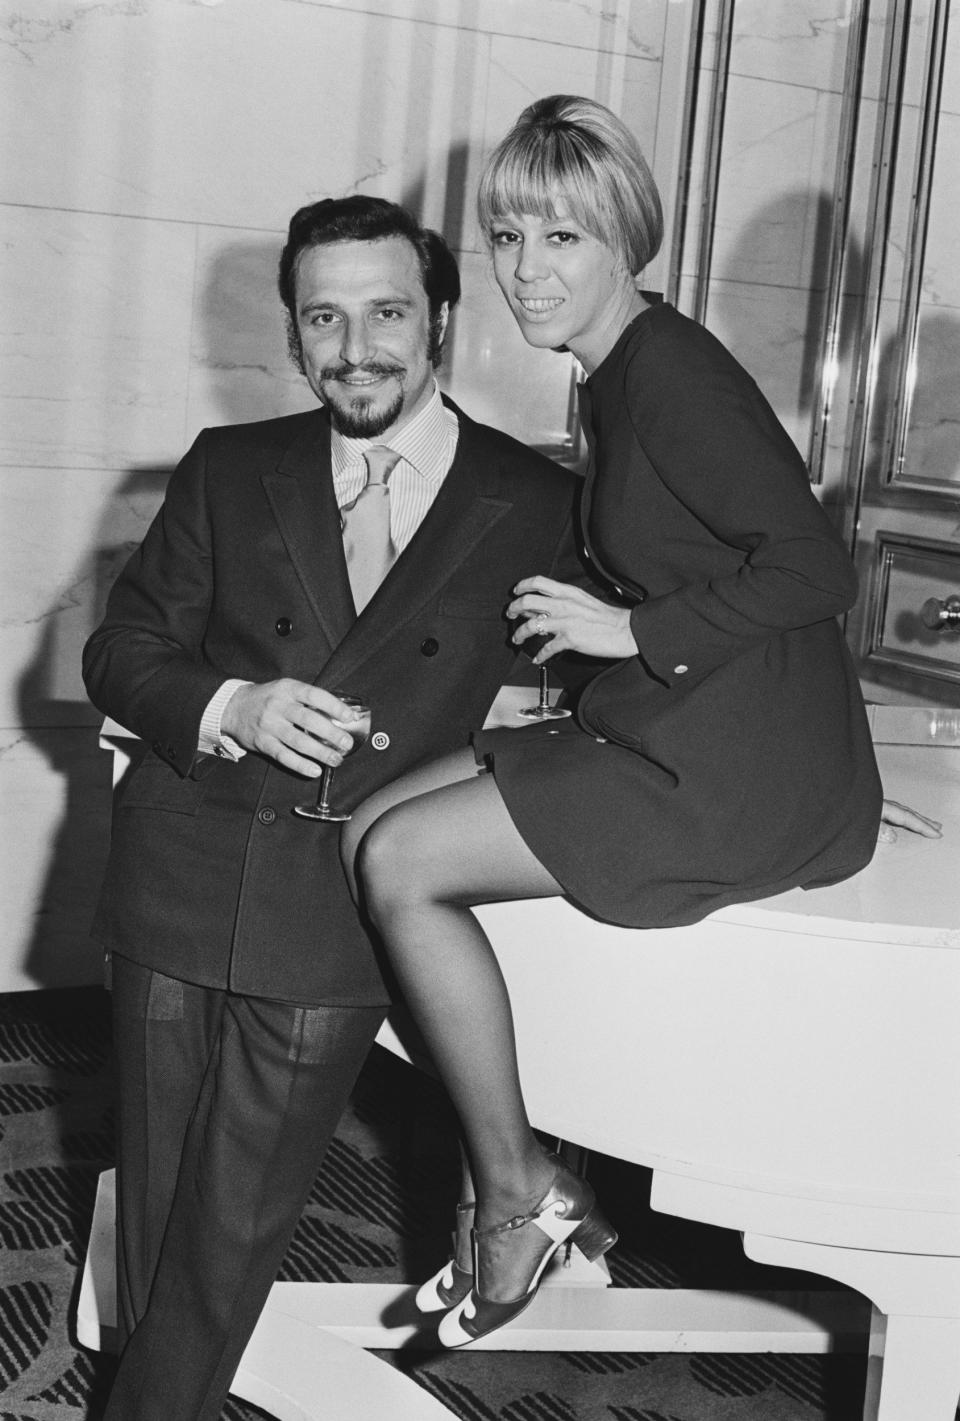 Mann and Cynthia Weil in 1969 - P Shirley/Daily Express/Hulton Archive/Getty Images